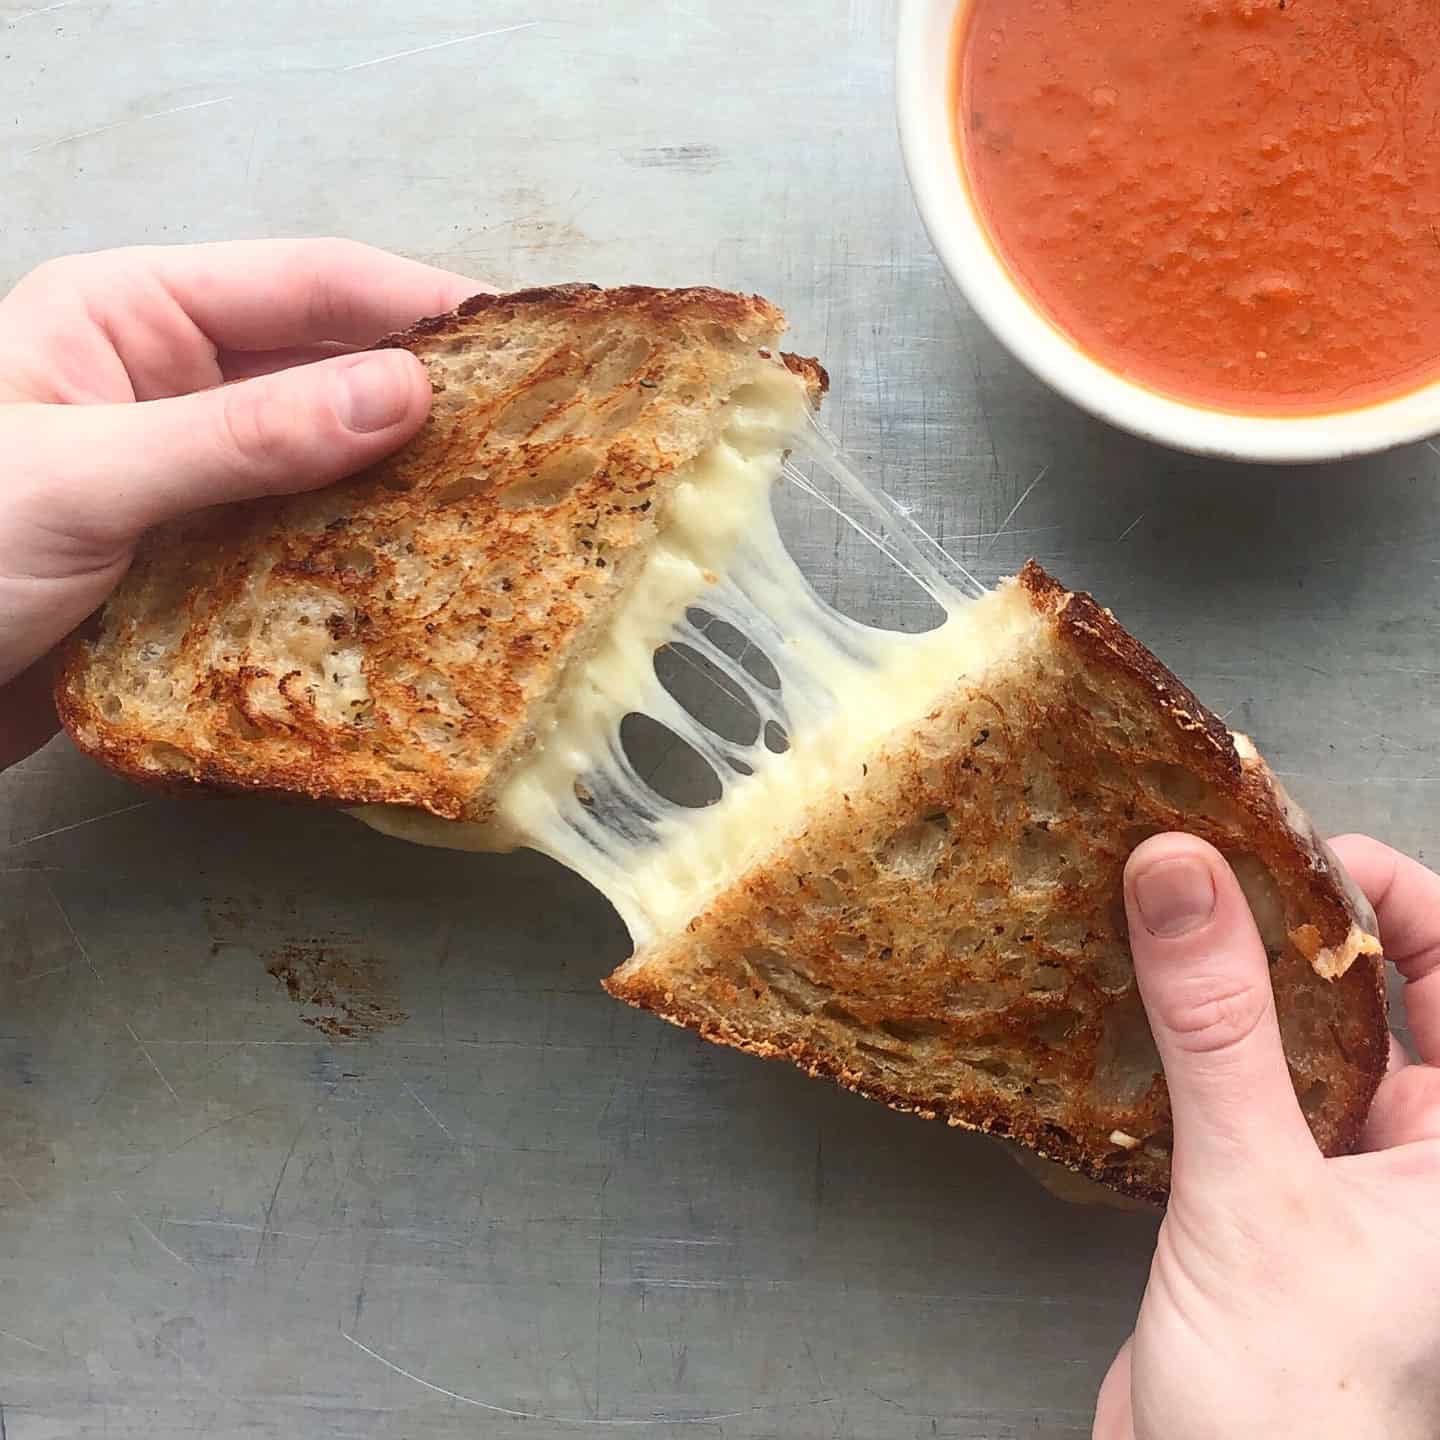 August First - Grilled Cheese with Tomato Soup